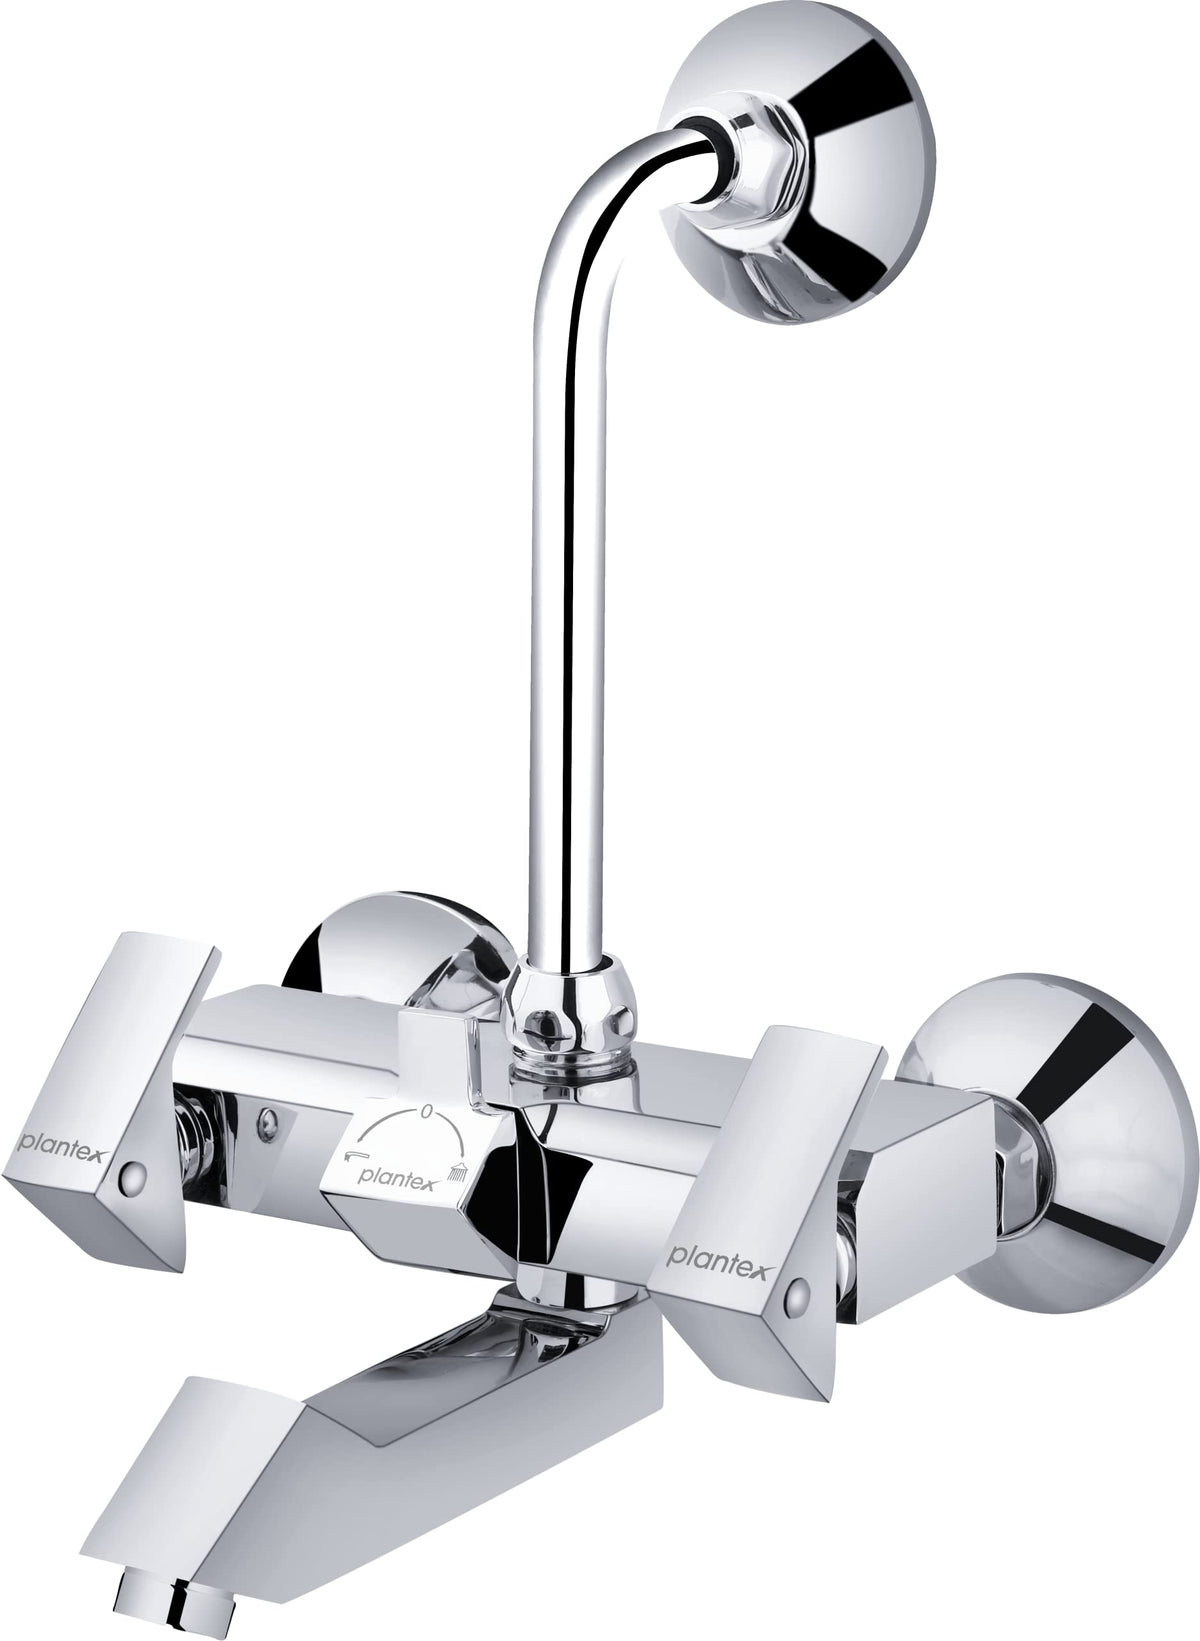 Plantex PRI-318 Pure Brass 2 in 1 Wall Mixer with Arrangement of Overhead Shower for Bathroom/Telephonic Wall Mixture Hot & Cold with Brass Wall Flange and Teflon Tape (Mirror-Chrome Finish)